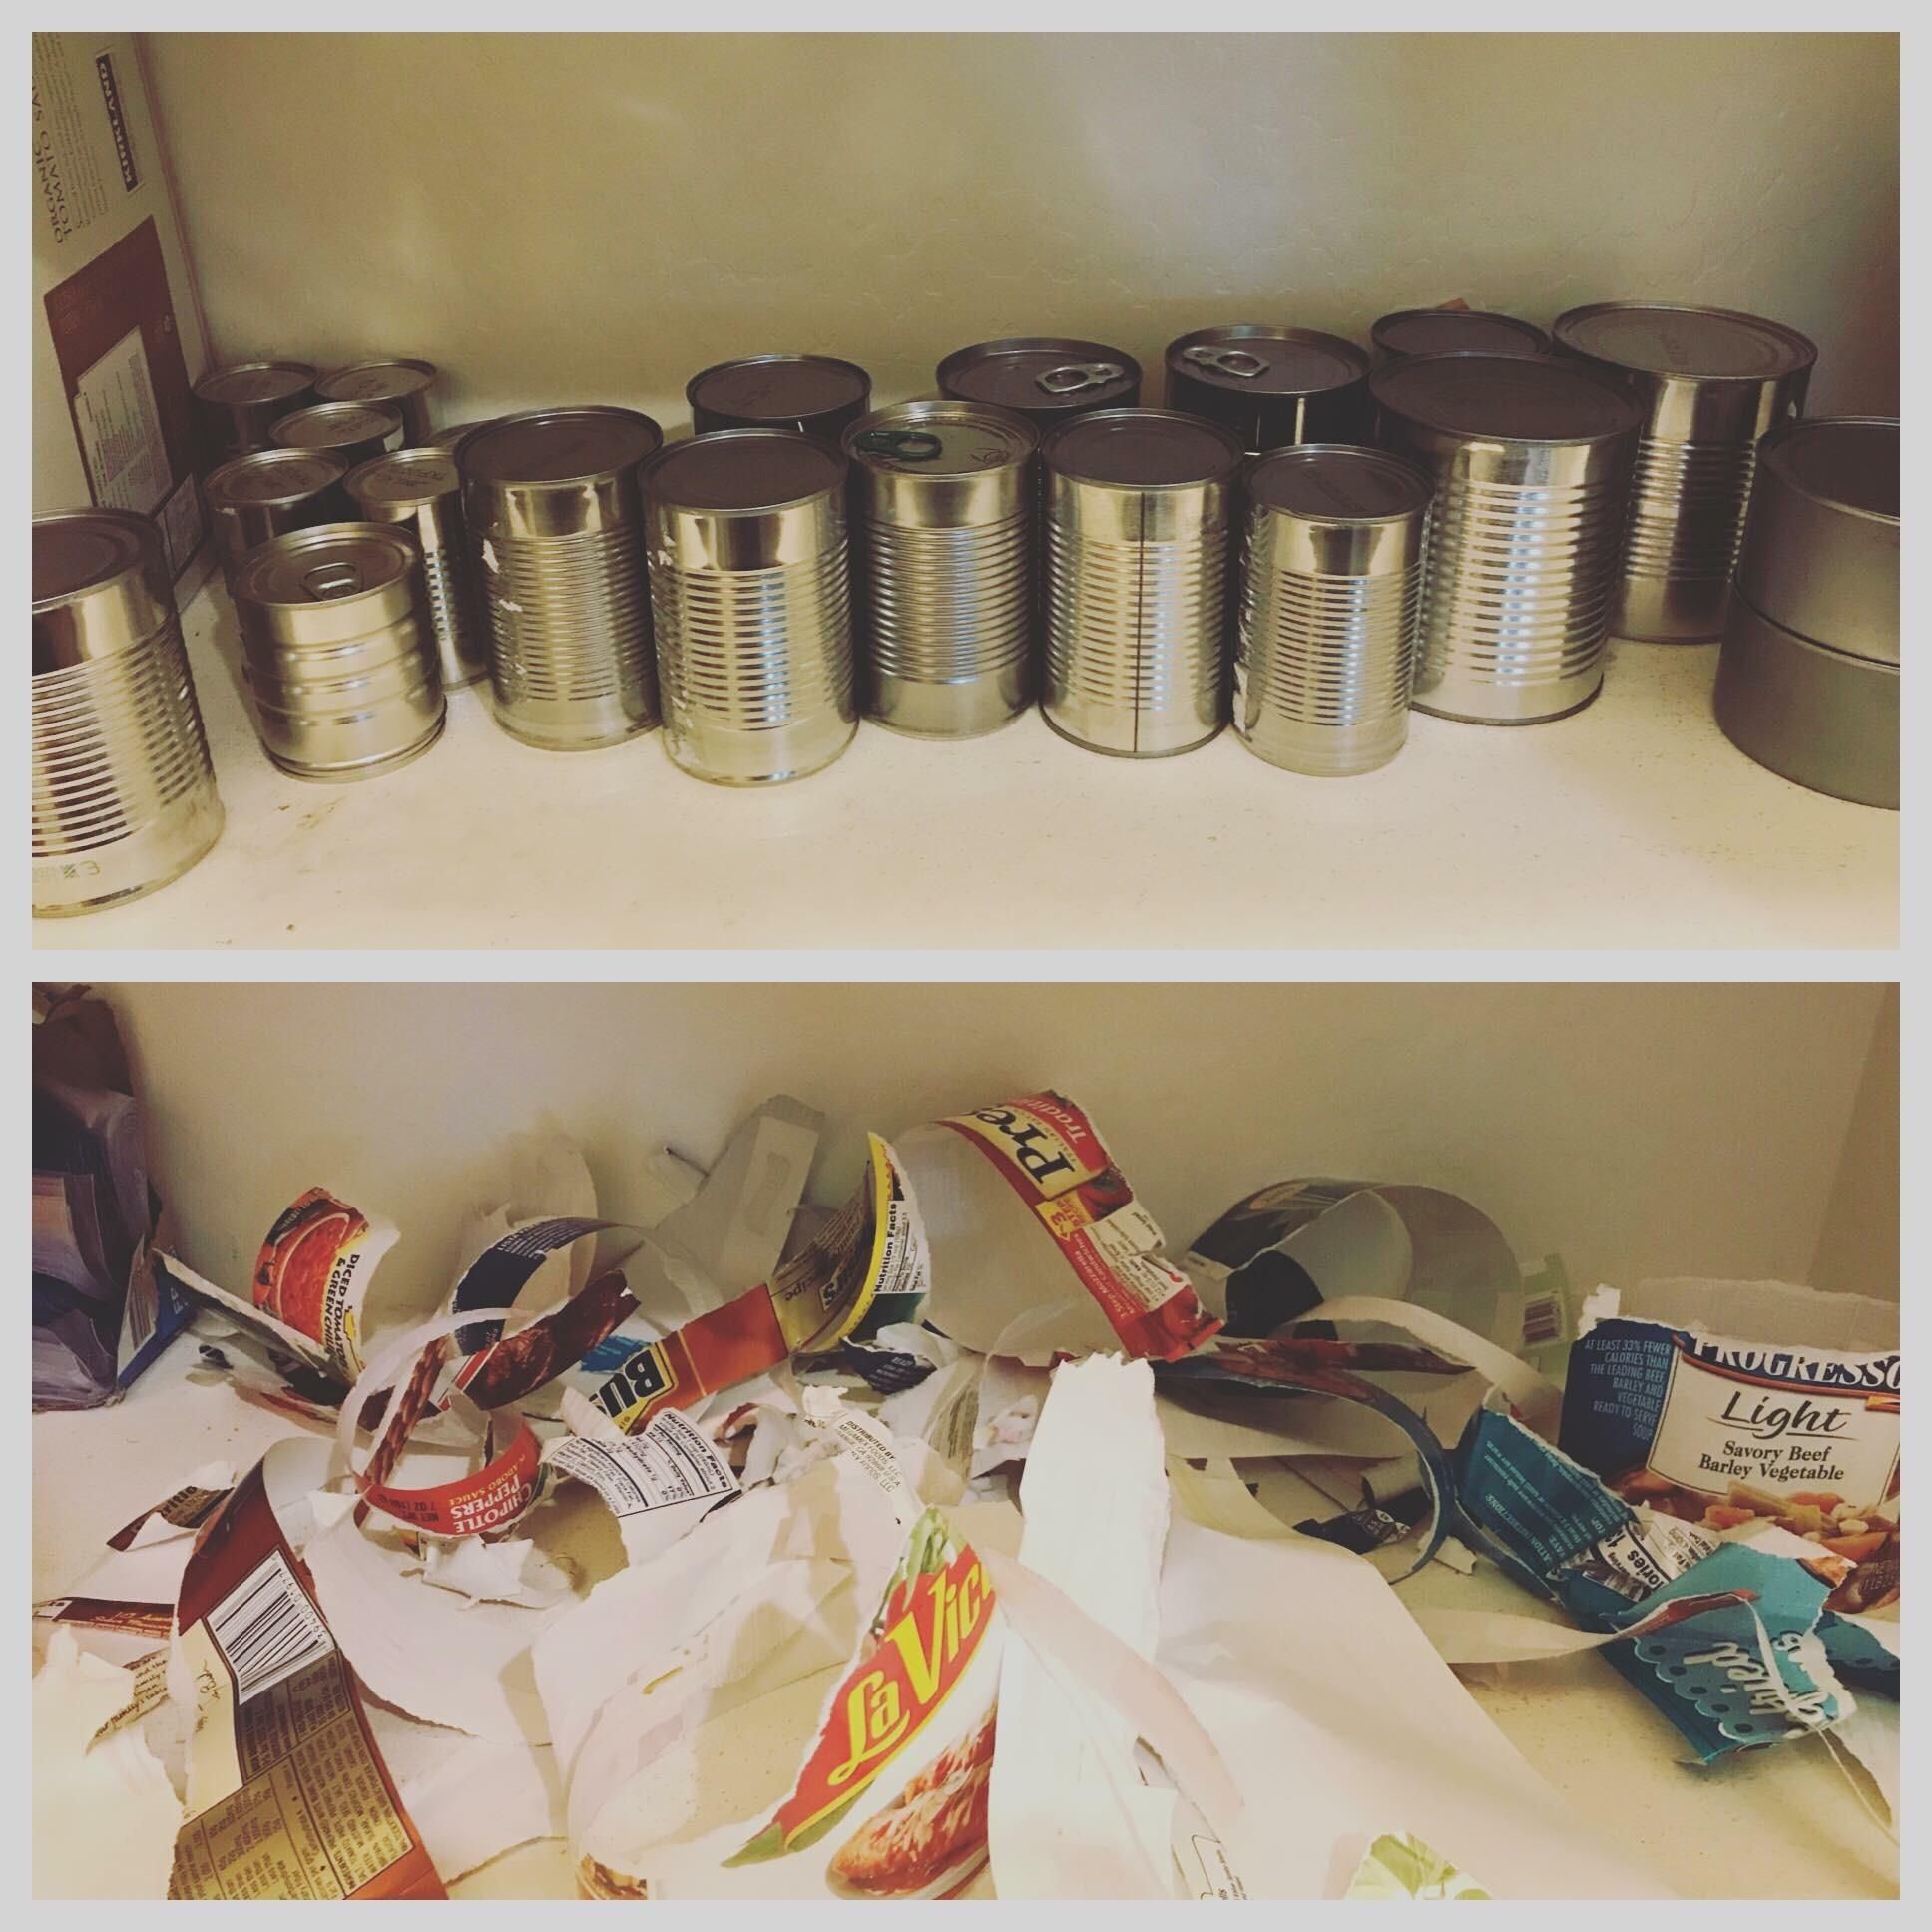 My friend’s kid did this to their pantry